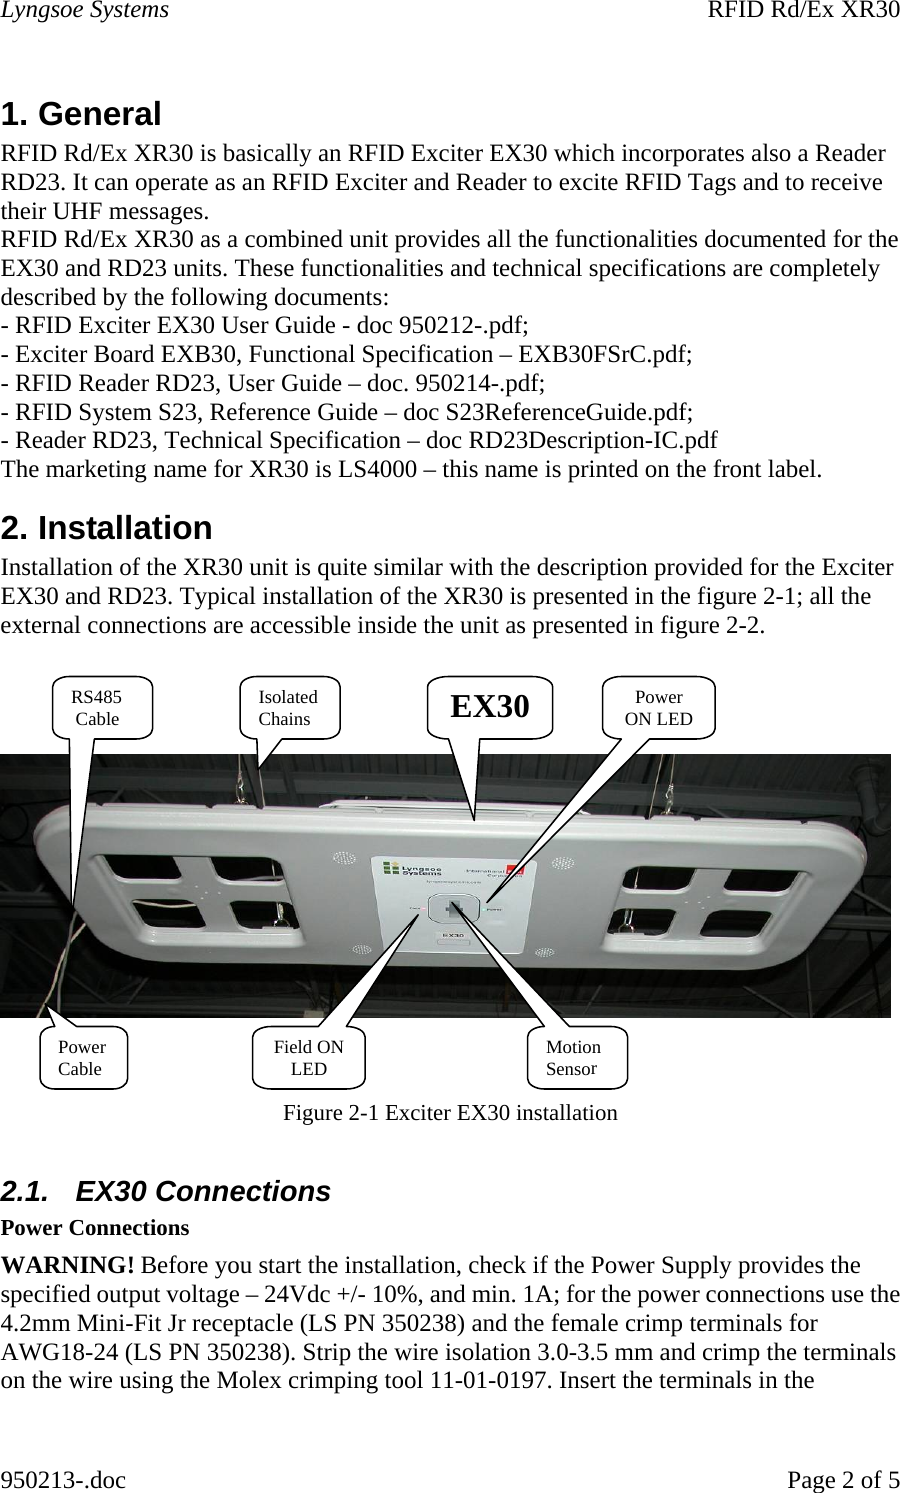 Lyngsoe Systems    RFID Rd/Ex XR30 950213-.doc    Page 2 of 5 1. General  RFID Rd/Ex XR30 is basically an RFID Exciter EX30 which incorporates also a Reader RD23. It can operate as an RFID Exciter and Reader to excite RFID Tags and to receive their UHF messages. RFID Rd/Ex XR30 as a combined unit provides all the functionalities documented for the EX30 and RD23 units. These functionalities and technical specifications are completely described by the following documents: - RFID Exciter EX30 User Guide - doc 950212-.pdf; - Exciter Board EXB30, Functional Specification – EXB30FSrC.pdf; - RFID Reader RD23, User Guide – doc. 950214-.pdf; - RFID System S23, Reference Guide – doc S23ReferenceGuide.pdf; - Reader RD23, Technical Specification – doc RD23Description-IC.pdf The marketing name for XR30 is LS4000 – this name is printed on the front label. 2. Installation  Installation of the XR30 unit is quite similar with the description provided for the Exciter EX30 and RD23. Typical installation of the XR30 is presented in the figure 2-1; all the external connections are accessible inside the unit as presented in figure 2-2.        Figure 2-1 Exciter EX30 installation  2.1.  EX30 Connections  Power Connections  WARNING! Before you start the installation, check if the Power Supply provides the specified output voltage – 24Vdc +/- 10%, and min. 1A; for the power connections use the 4.2mm Mini-Fit Jr receptacle (LS PN 350238) and the female crimp terminals for AWG18-24 (LS PN 350238). Strip the wire isolation 3.0-3.5 mm and crimp the terminals on the wire using the Molex crimping tool 11-01-0197. Insert the terminals in the EX30 Power Cable RS485  Cable  Power ON LEDField ON LED Motion  SensorIsolated Chains 